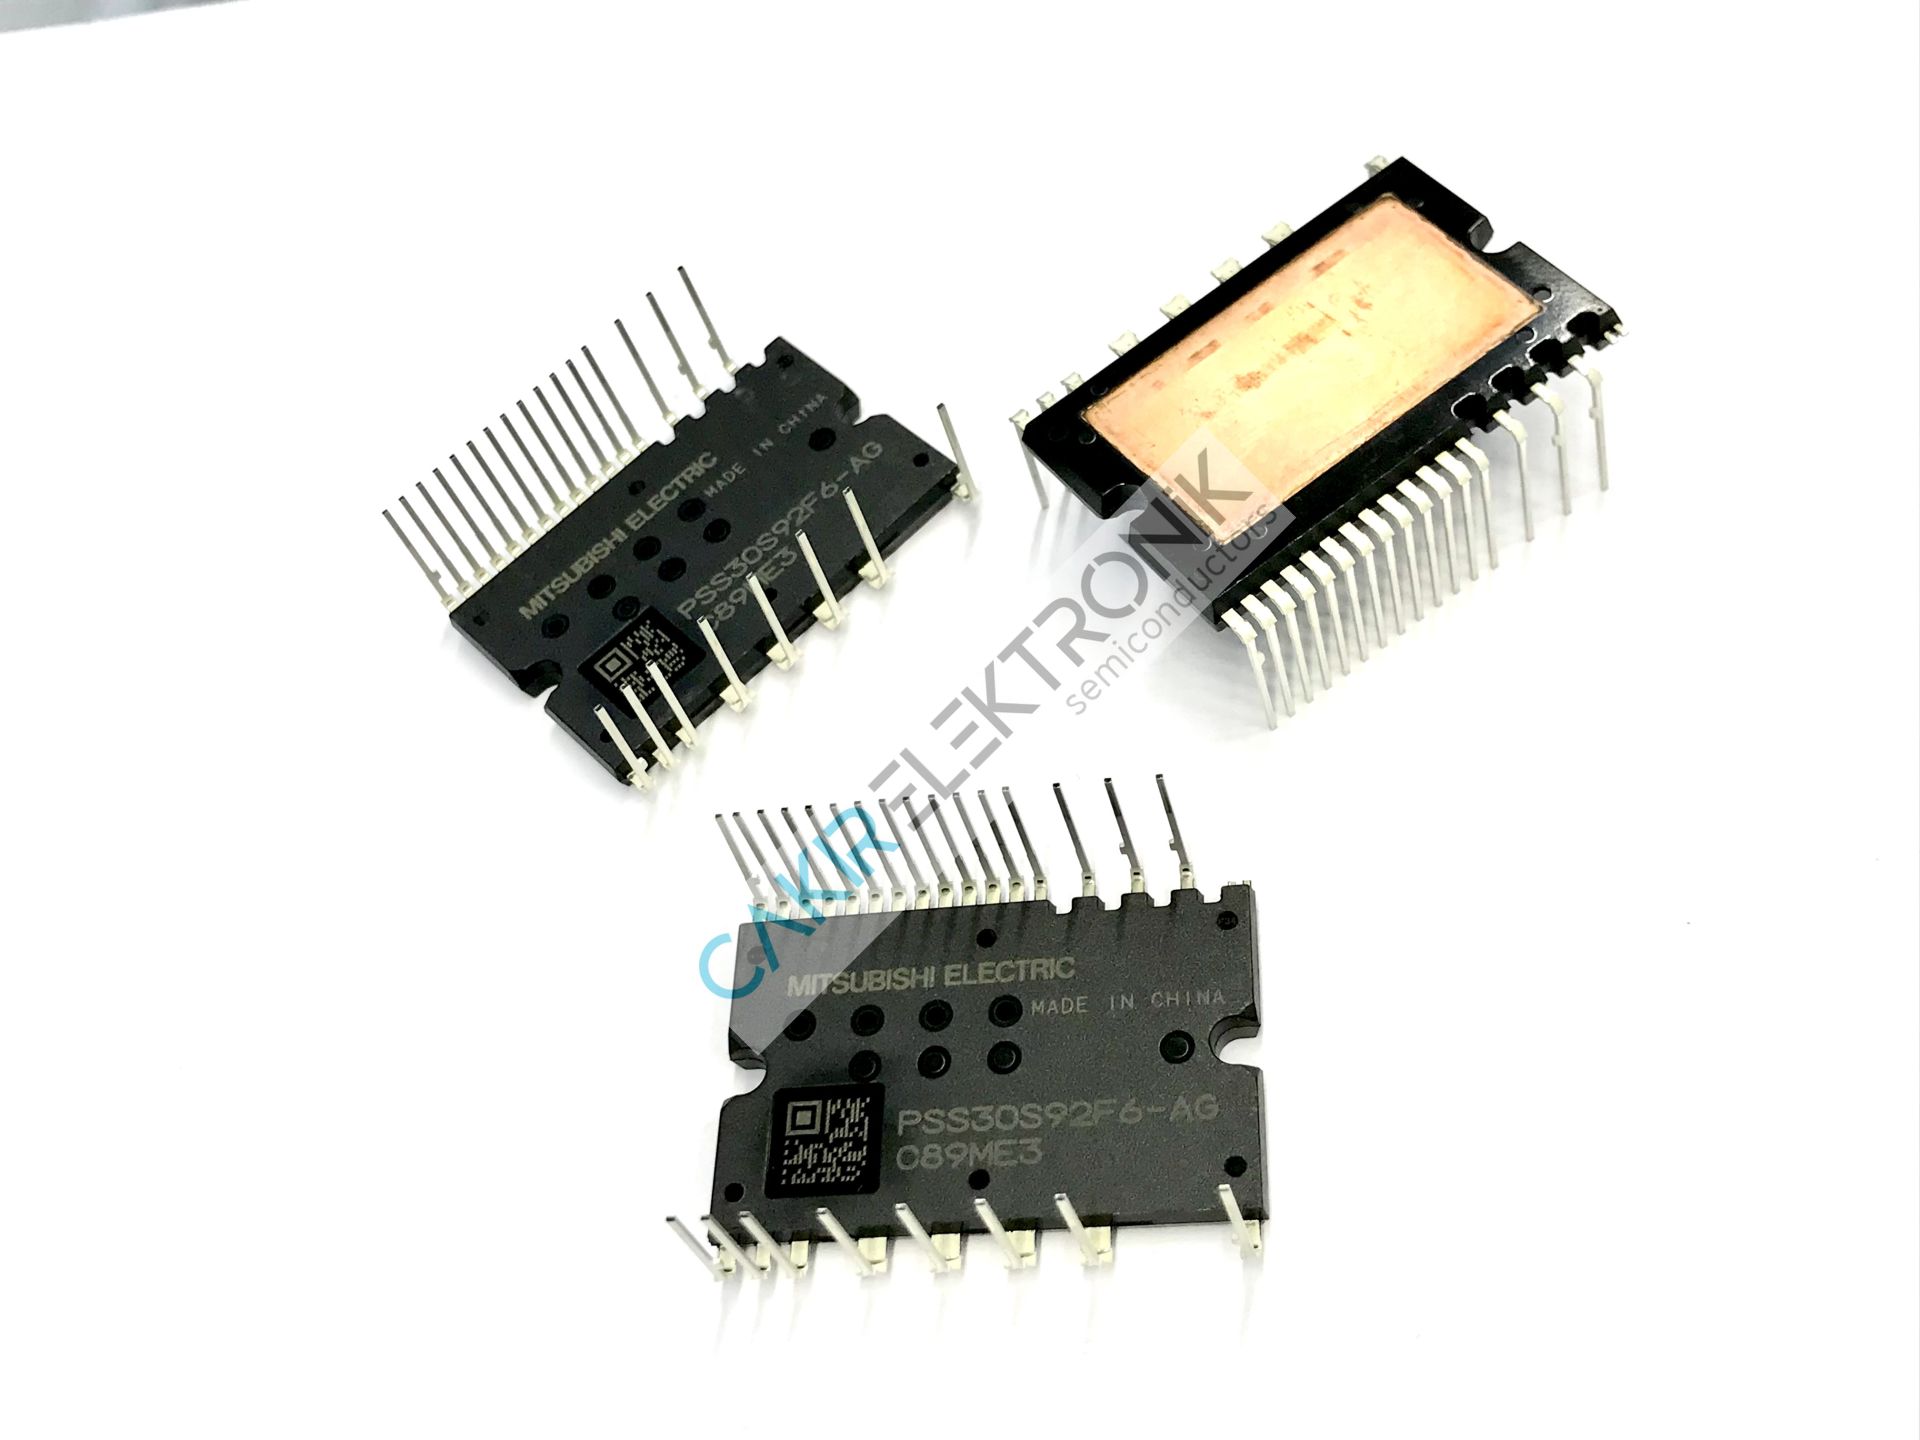 PSS30S92F6-AG - CPSS30S92E6-AG , Dual-In-Line Package Intelligent Power Module